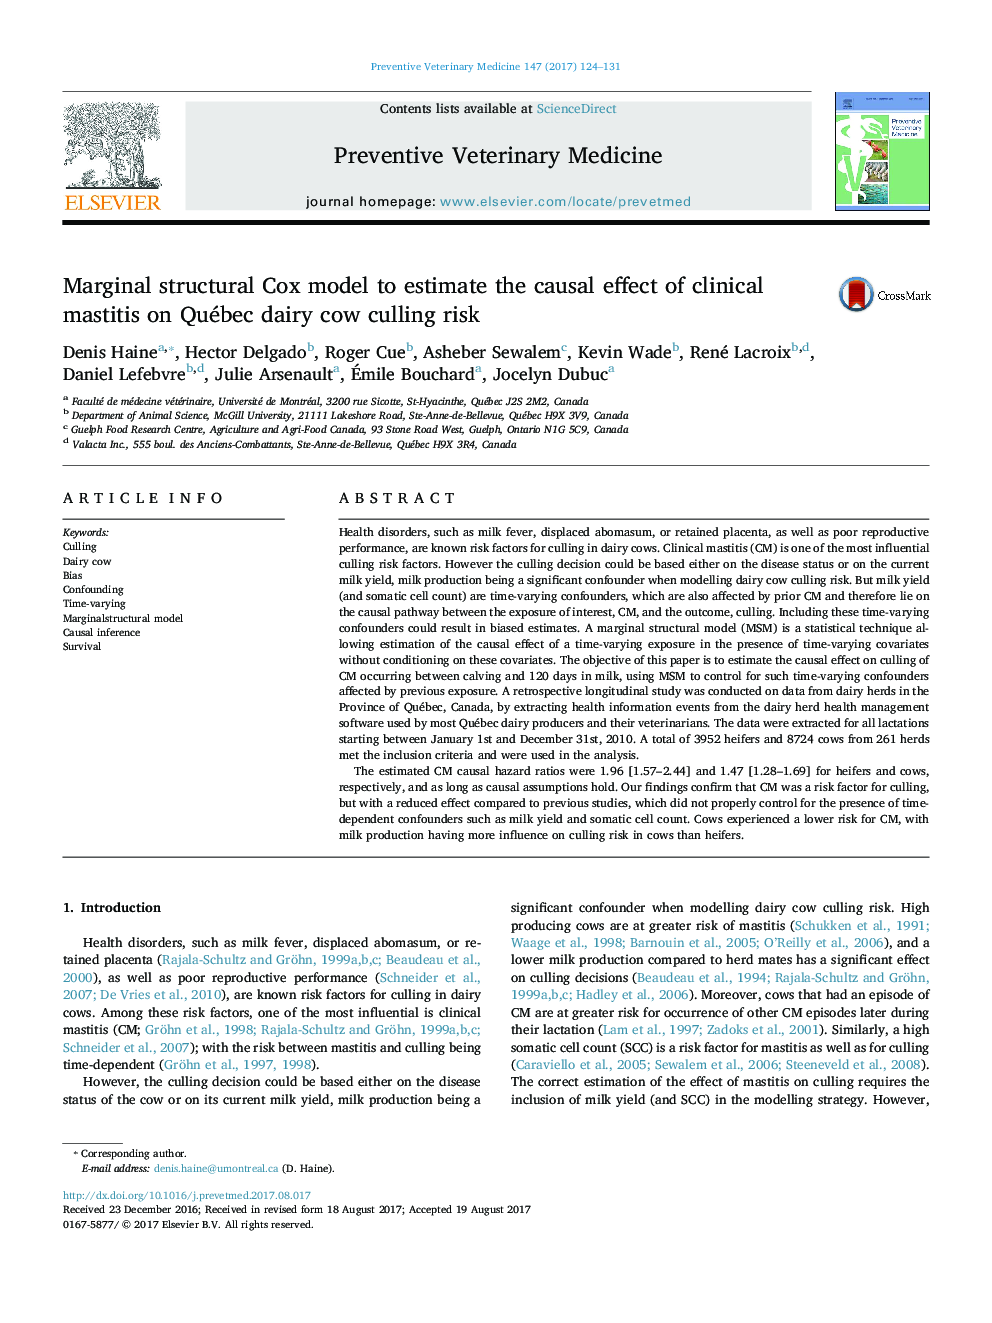 Marginal structural Cox model to estimate the causal effect of clinical mastitis on Québec dairy cow culling risk